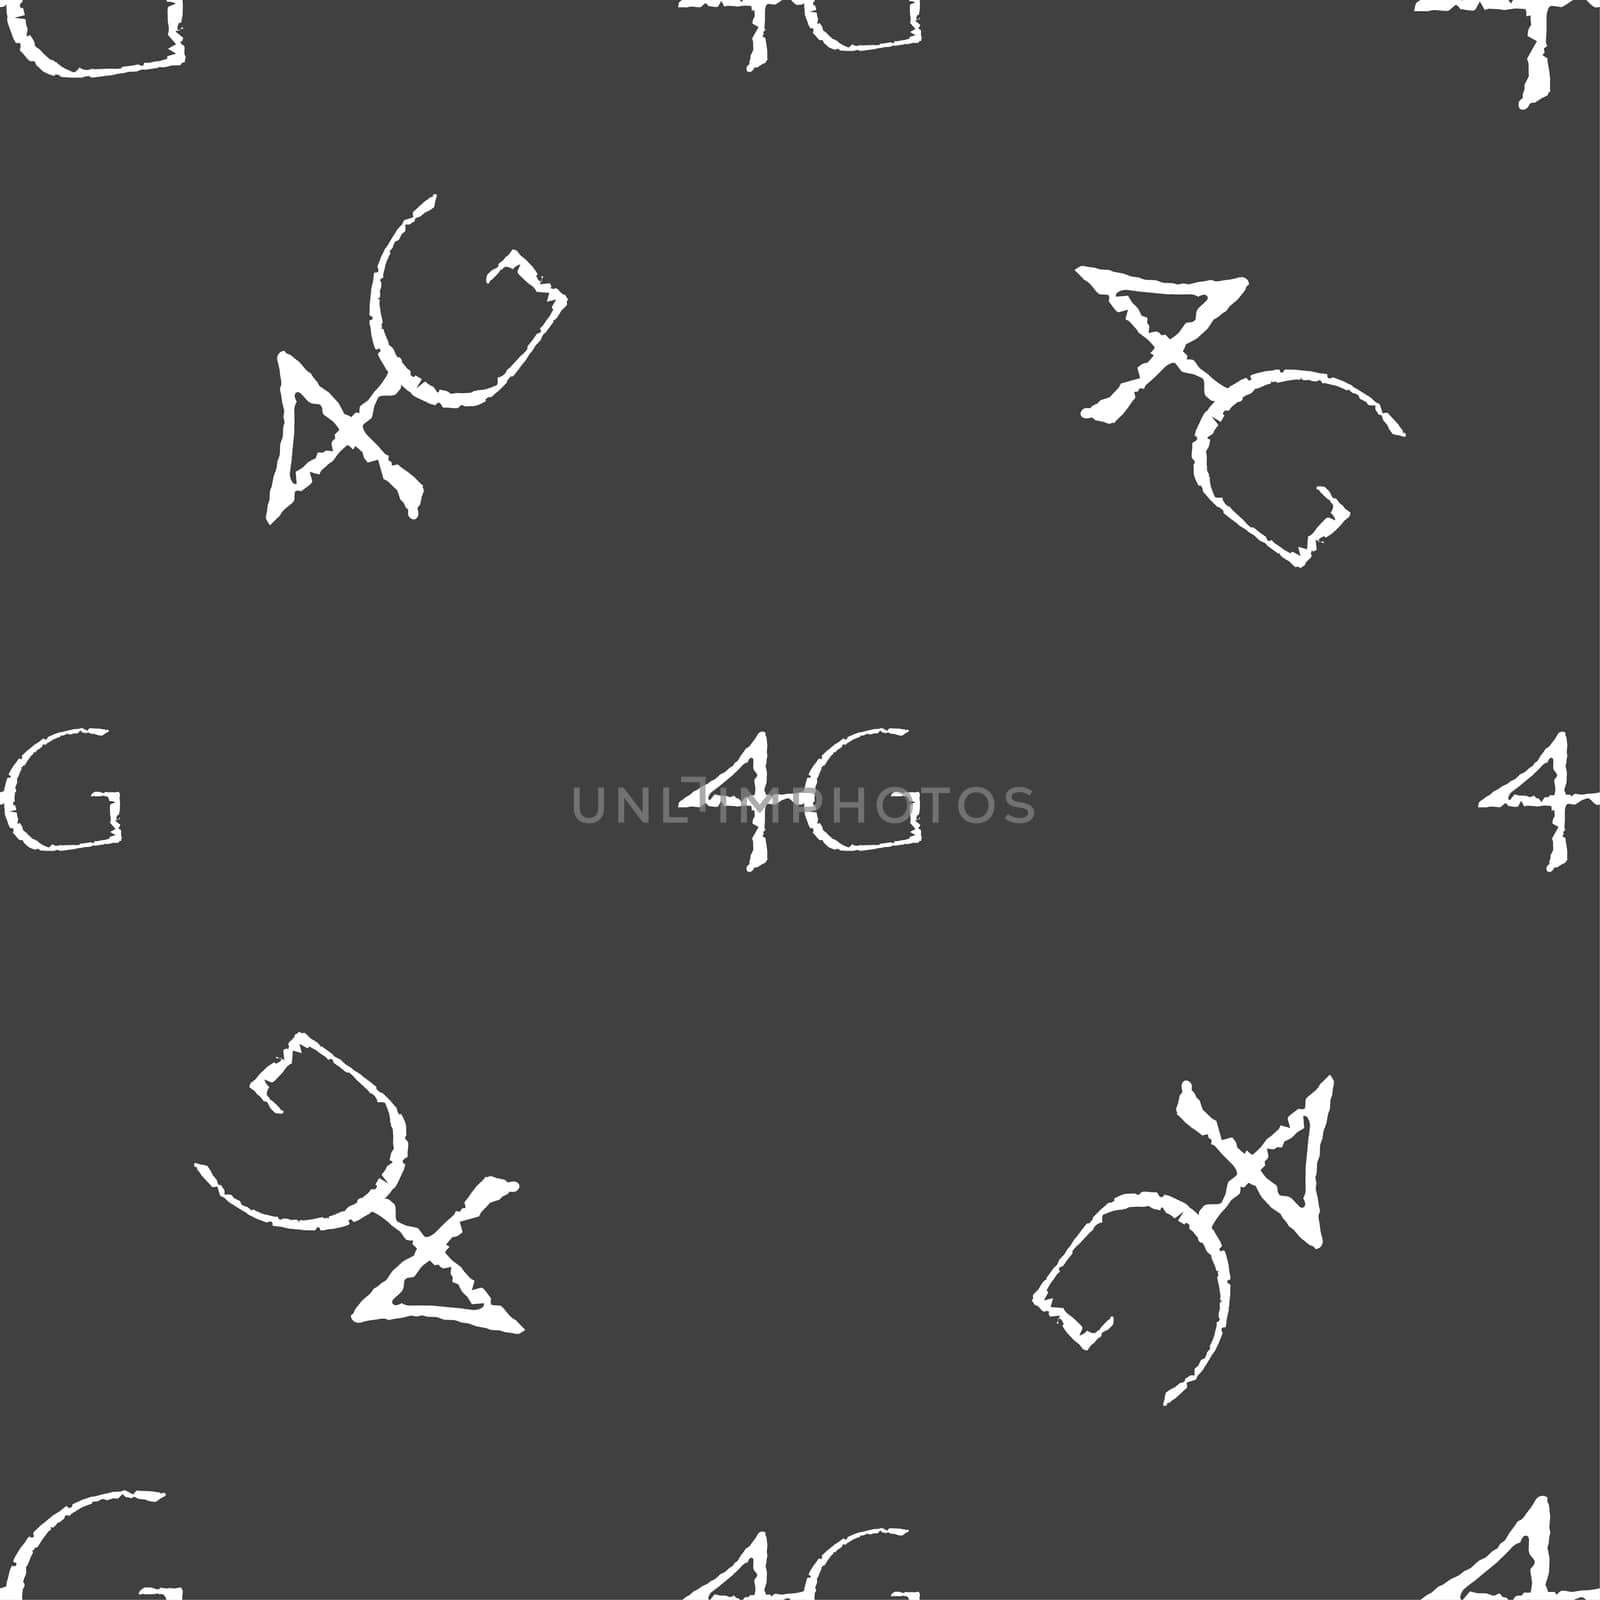 4G sign icon. Mobile telecommunications technology symbol. Seamless pattern on a gray background. illustration